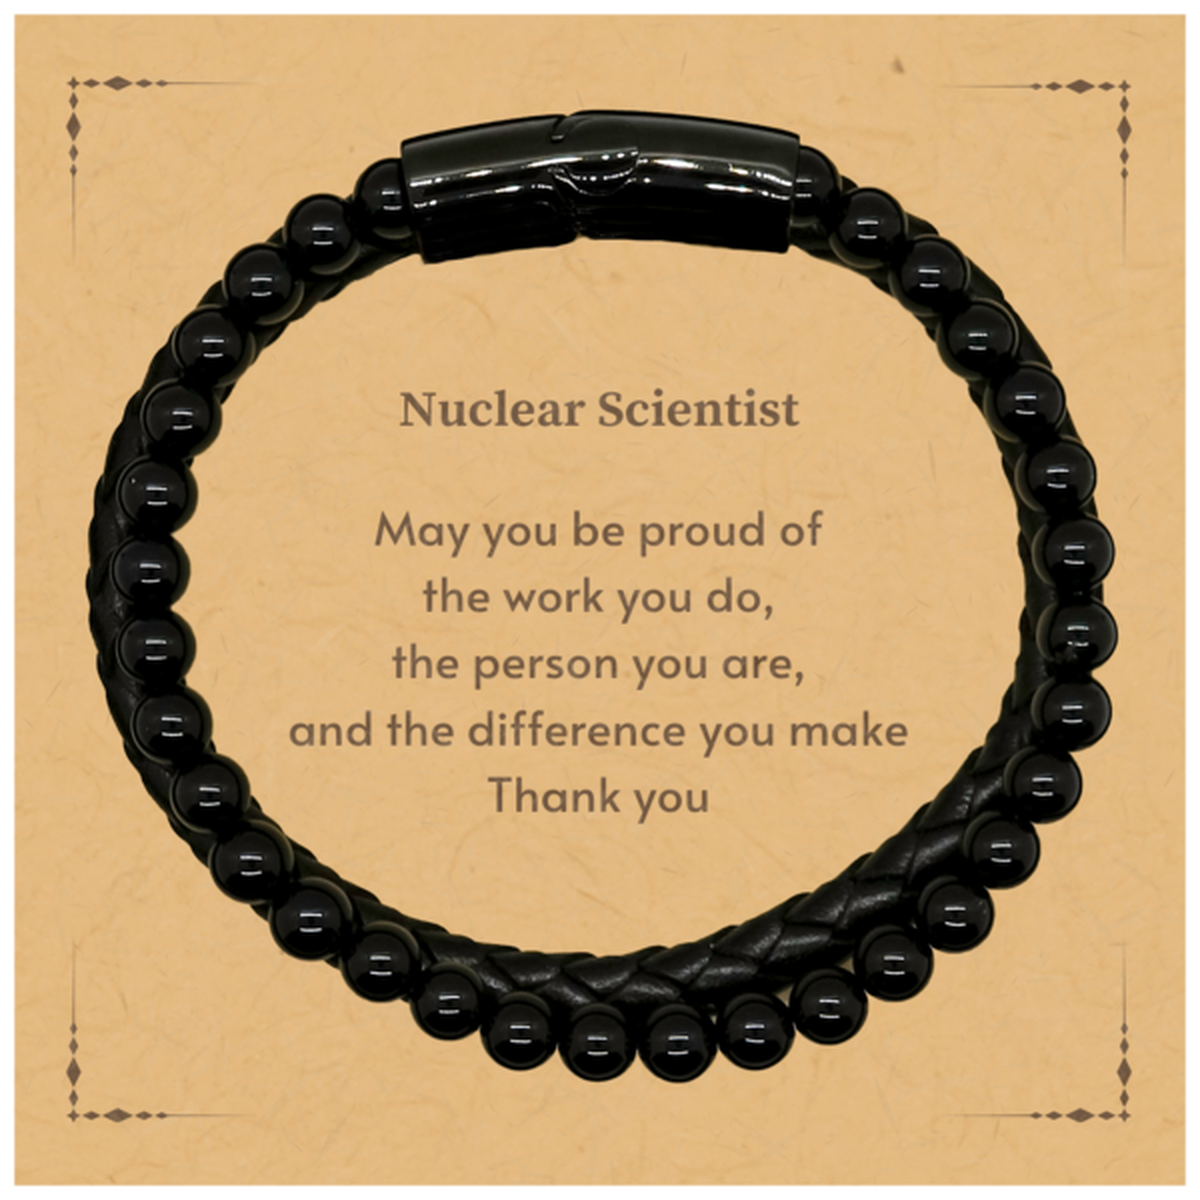 Heartwarming Stone Leather Bracelets Retirement Coworkers Gifts for Nuclear Scientist, Nuclear Scientist May You be proud of the work you do, the person you are Gifts for Boss Men Women Friends